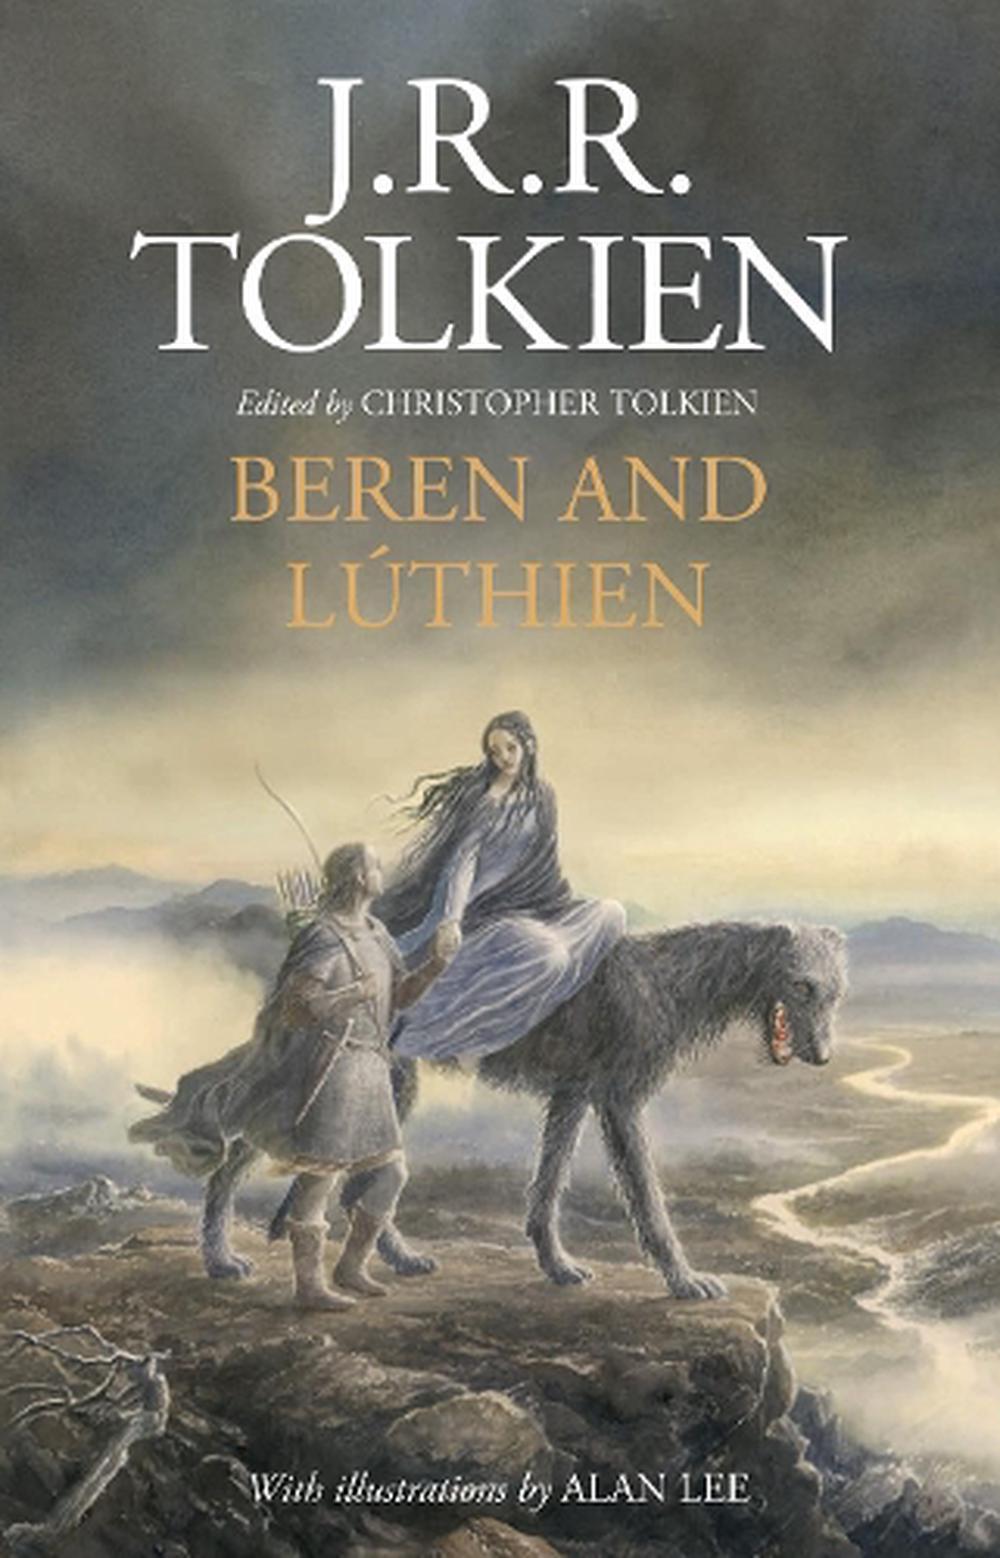 the tale of beren and lúthien